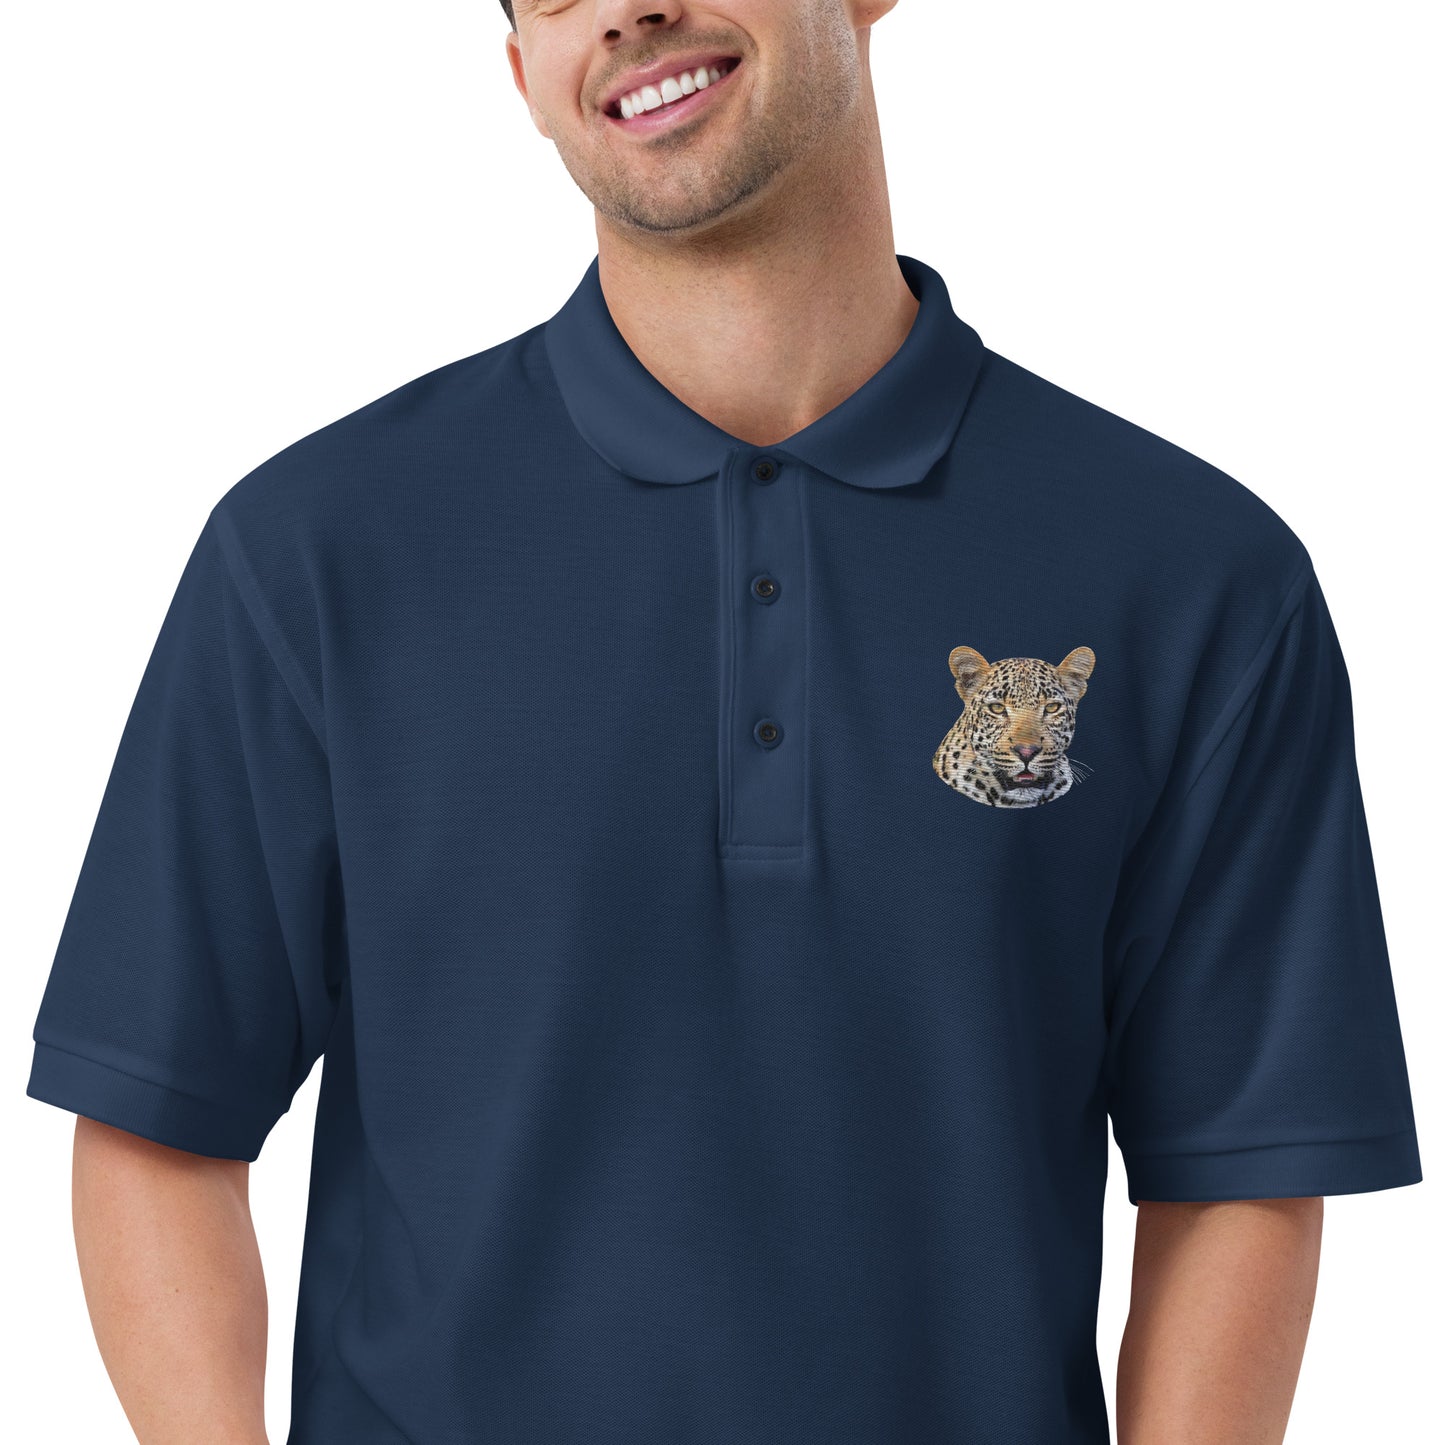 Polo Shirt with A Leopard Portrait Embroidered On The Shoulder.